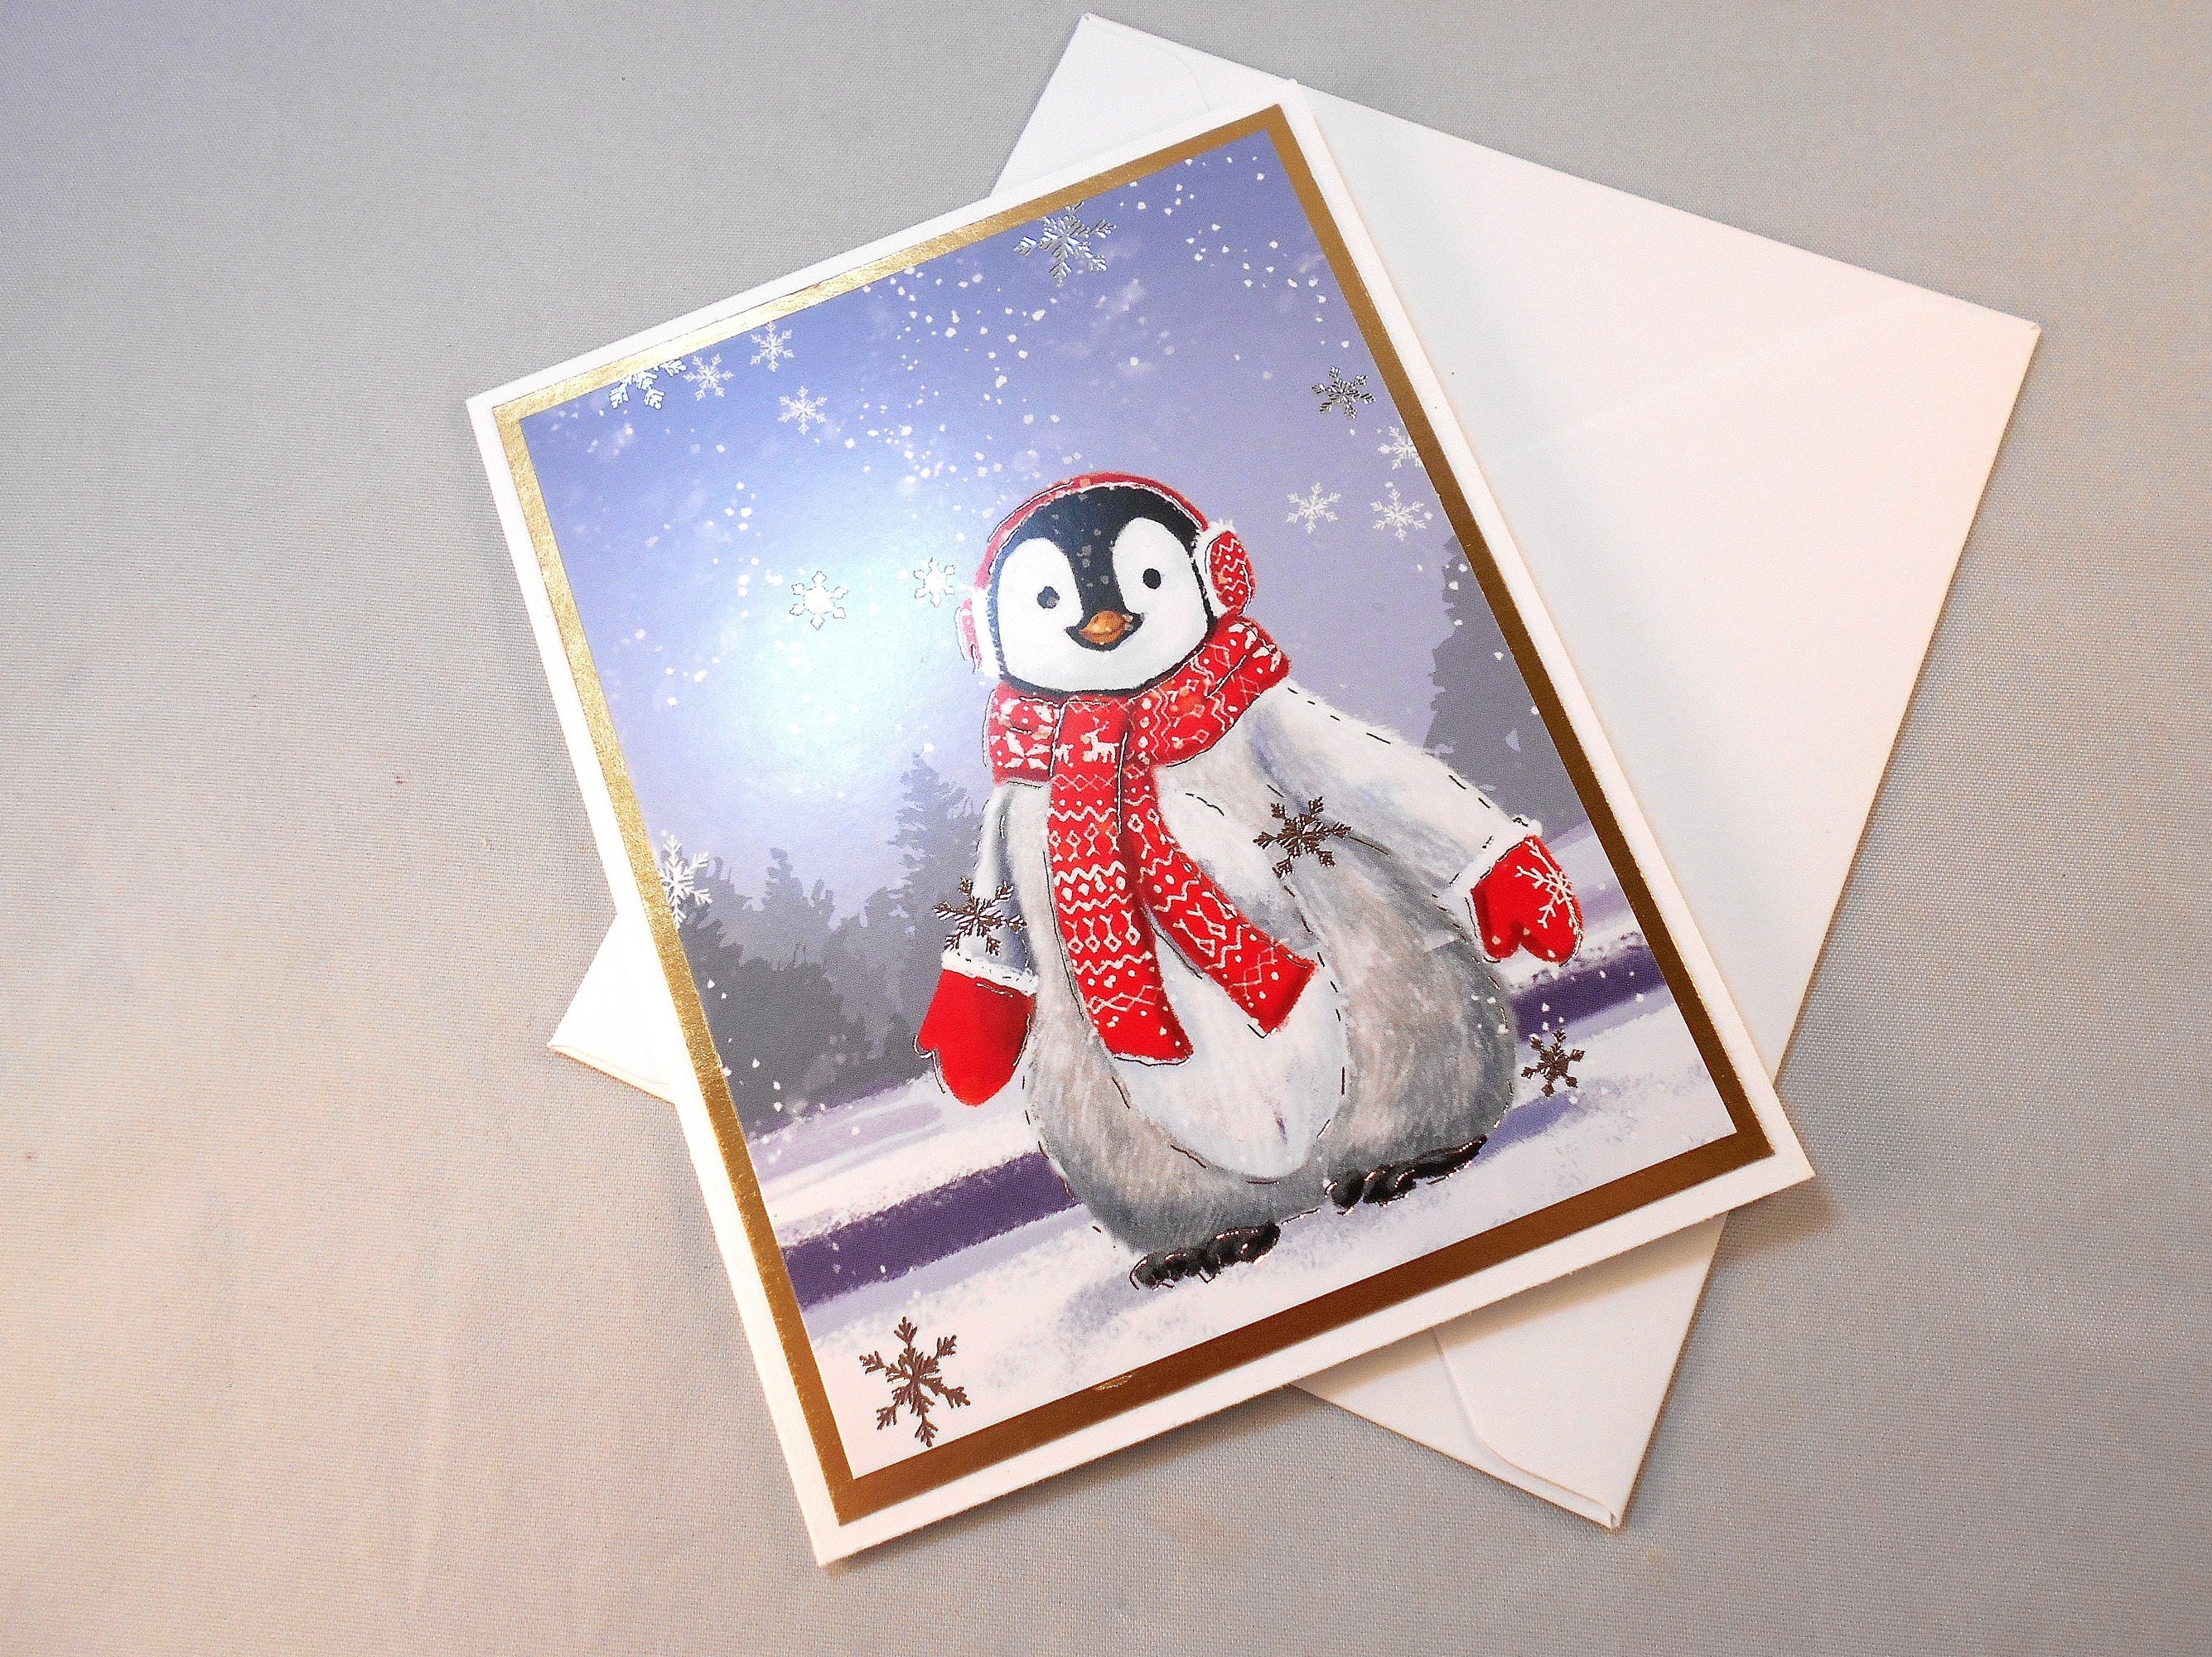 Details about   Snowman  Christmas Card Set  2 Money & 4 Gift Card  With Envelopes  New 